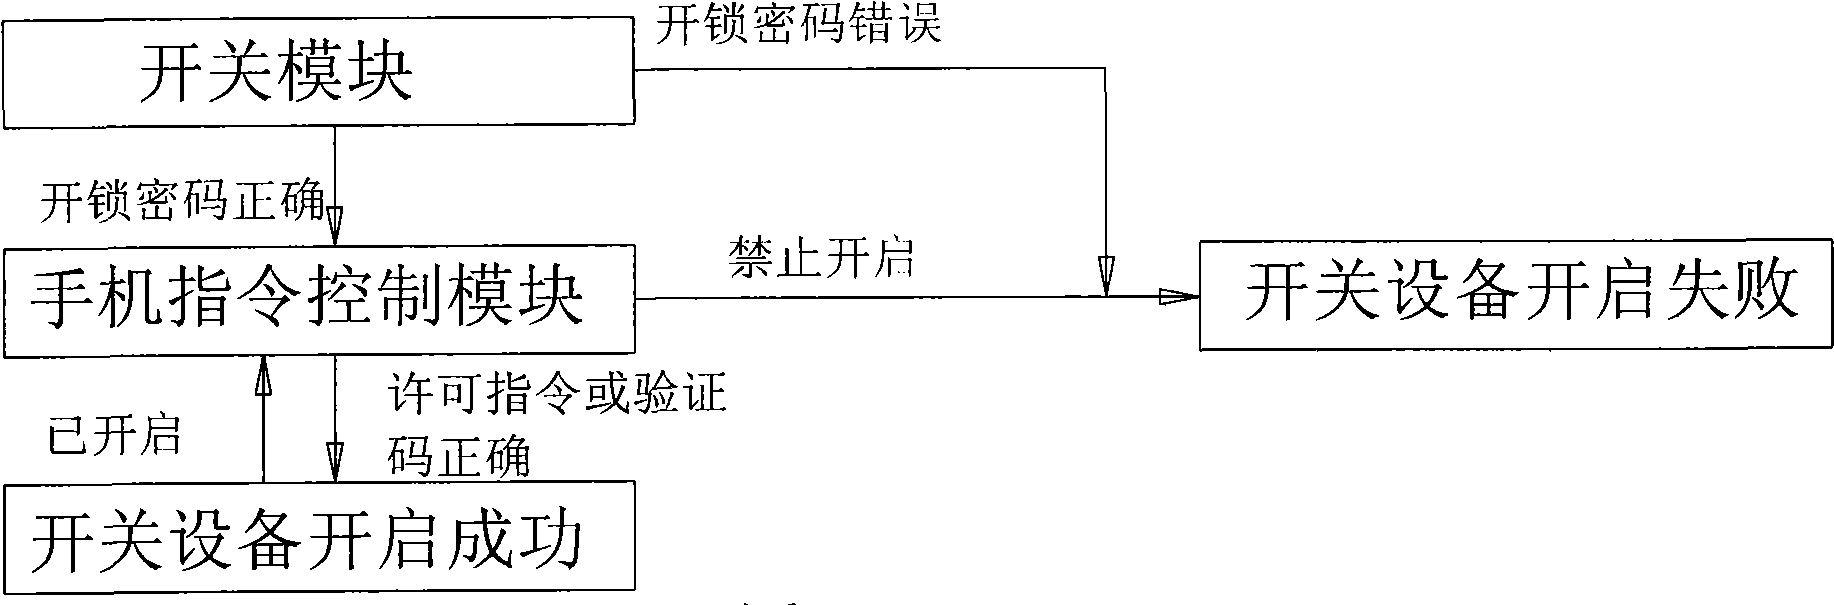 Controllable switch based on mobile phone short message instructions